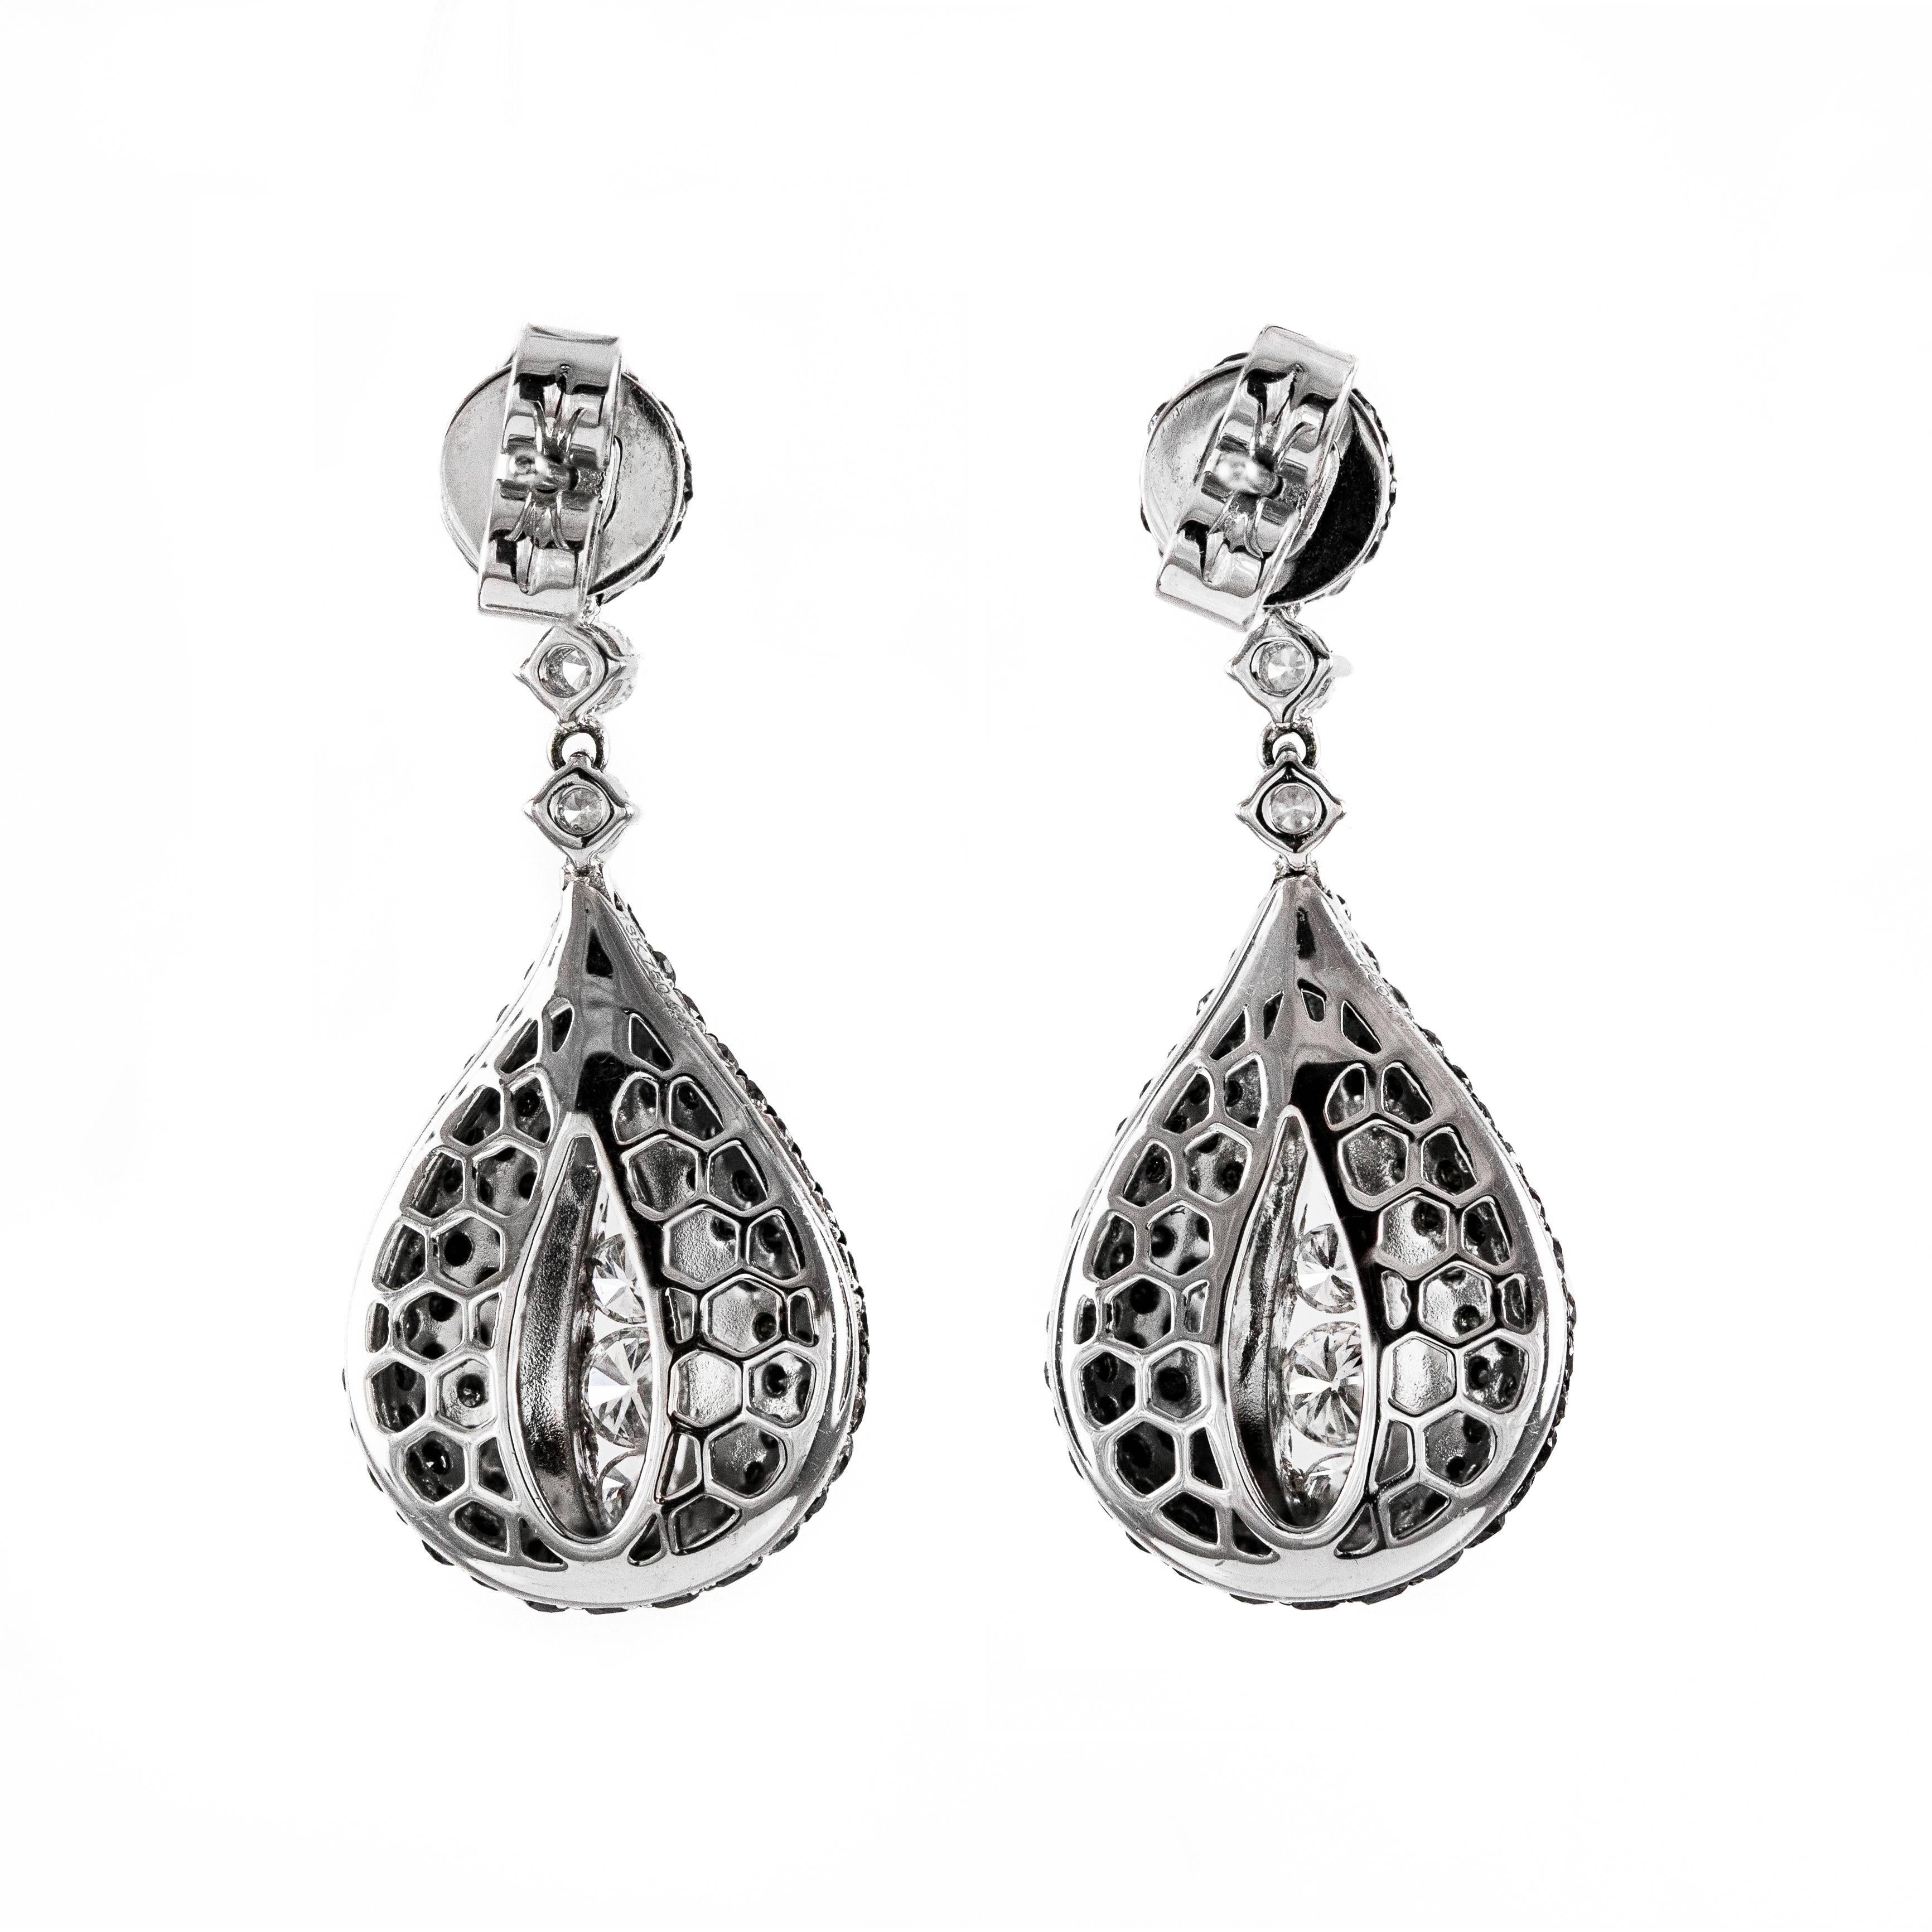 This pair of earrings features round brilliant white diamonds accented by round black diamonds pave set in round and pear shape. The total carat weight of the earrings is 3.18 carats. The top portion encompassing the bail has a micro pave setting of